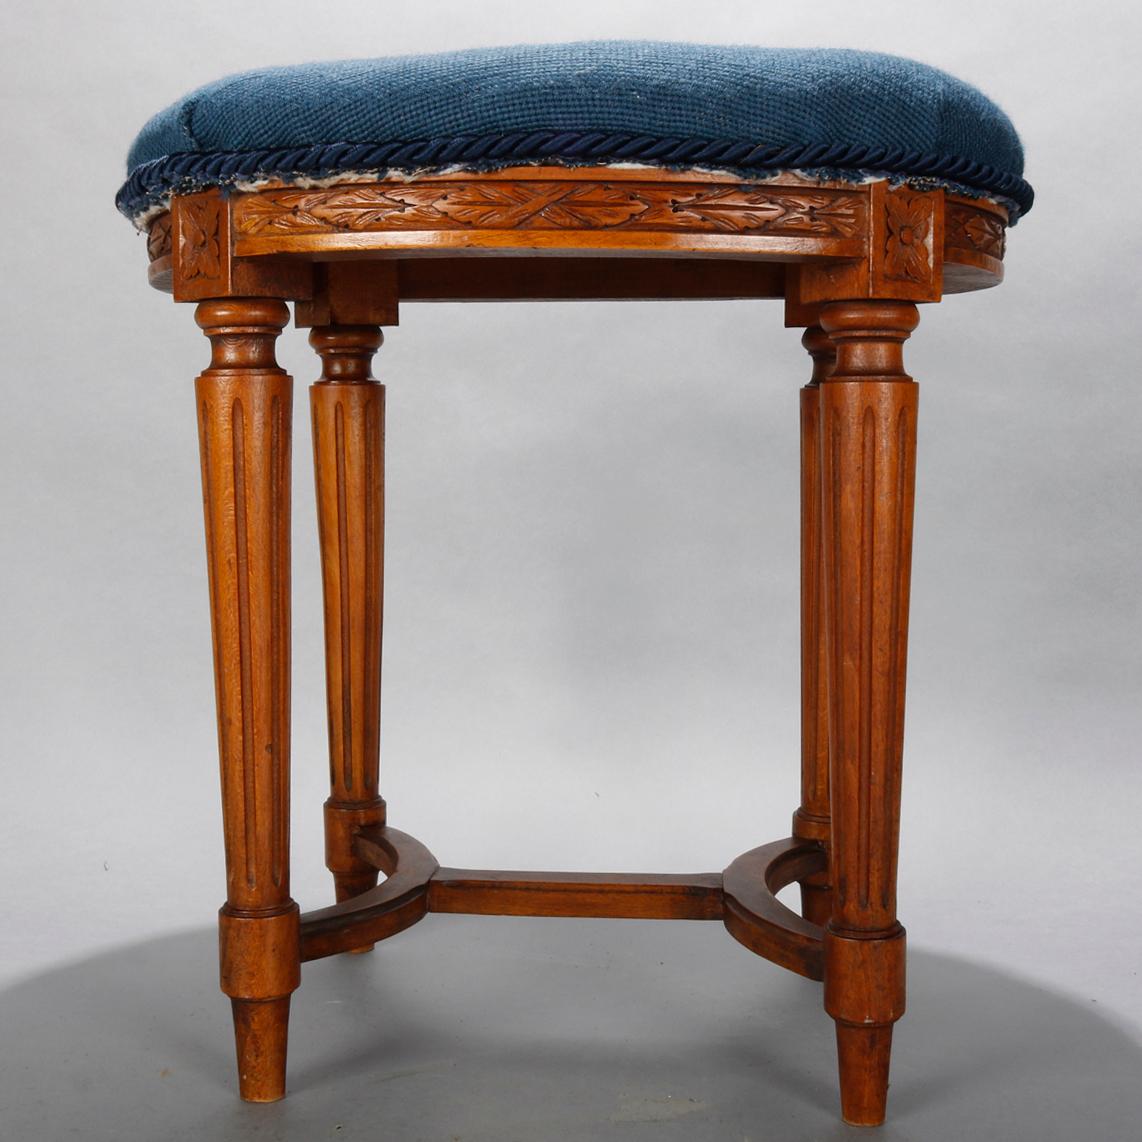 Fabric Antique French Louis XVI Fruitwood and Needlepoint Stool, 19th Century